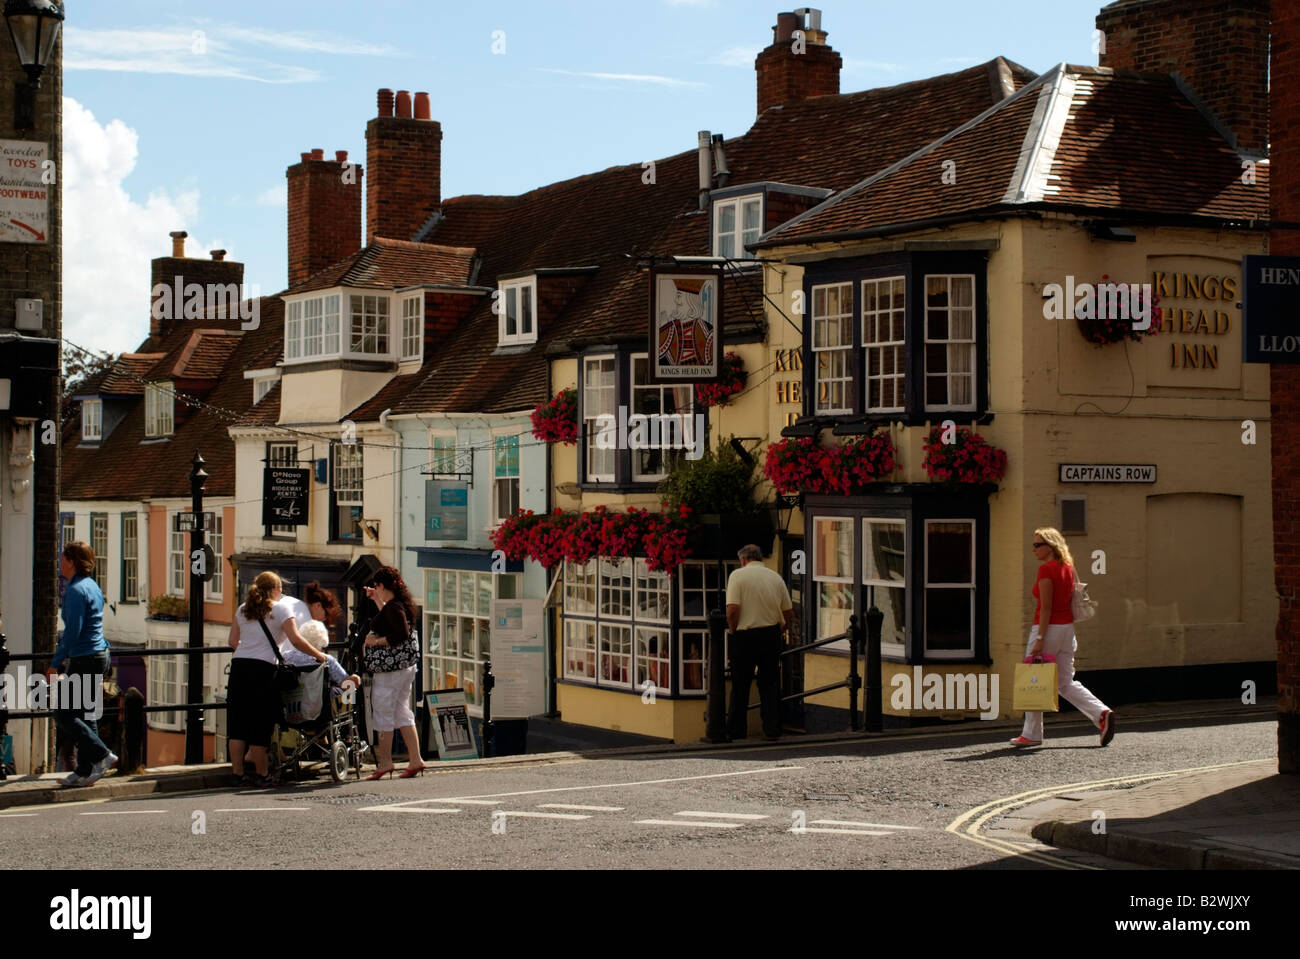 Lymington a georgian market town business premises Hampshire England pub and colorful properties close to the famous New Forest Stock Photo